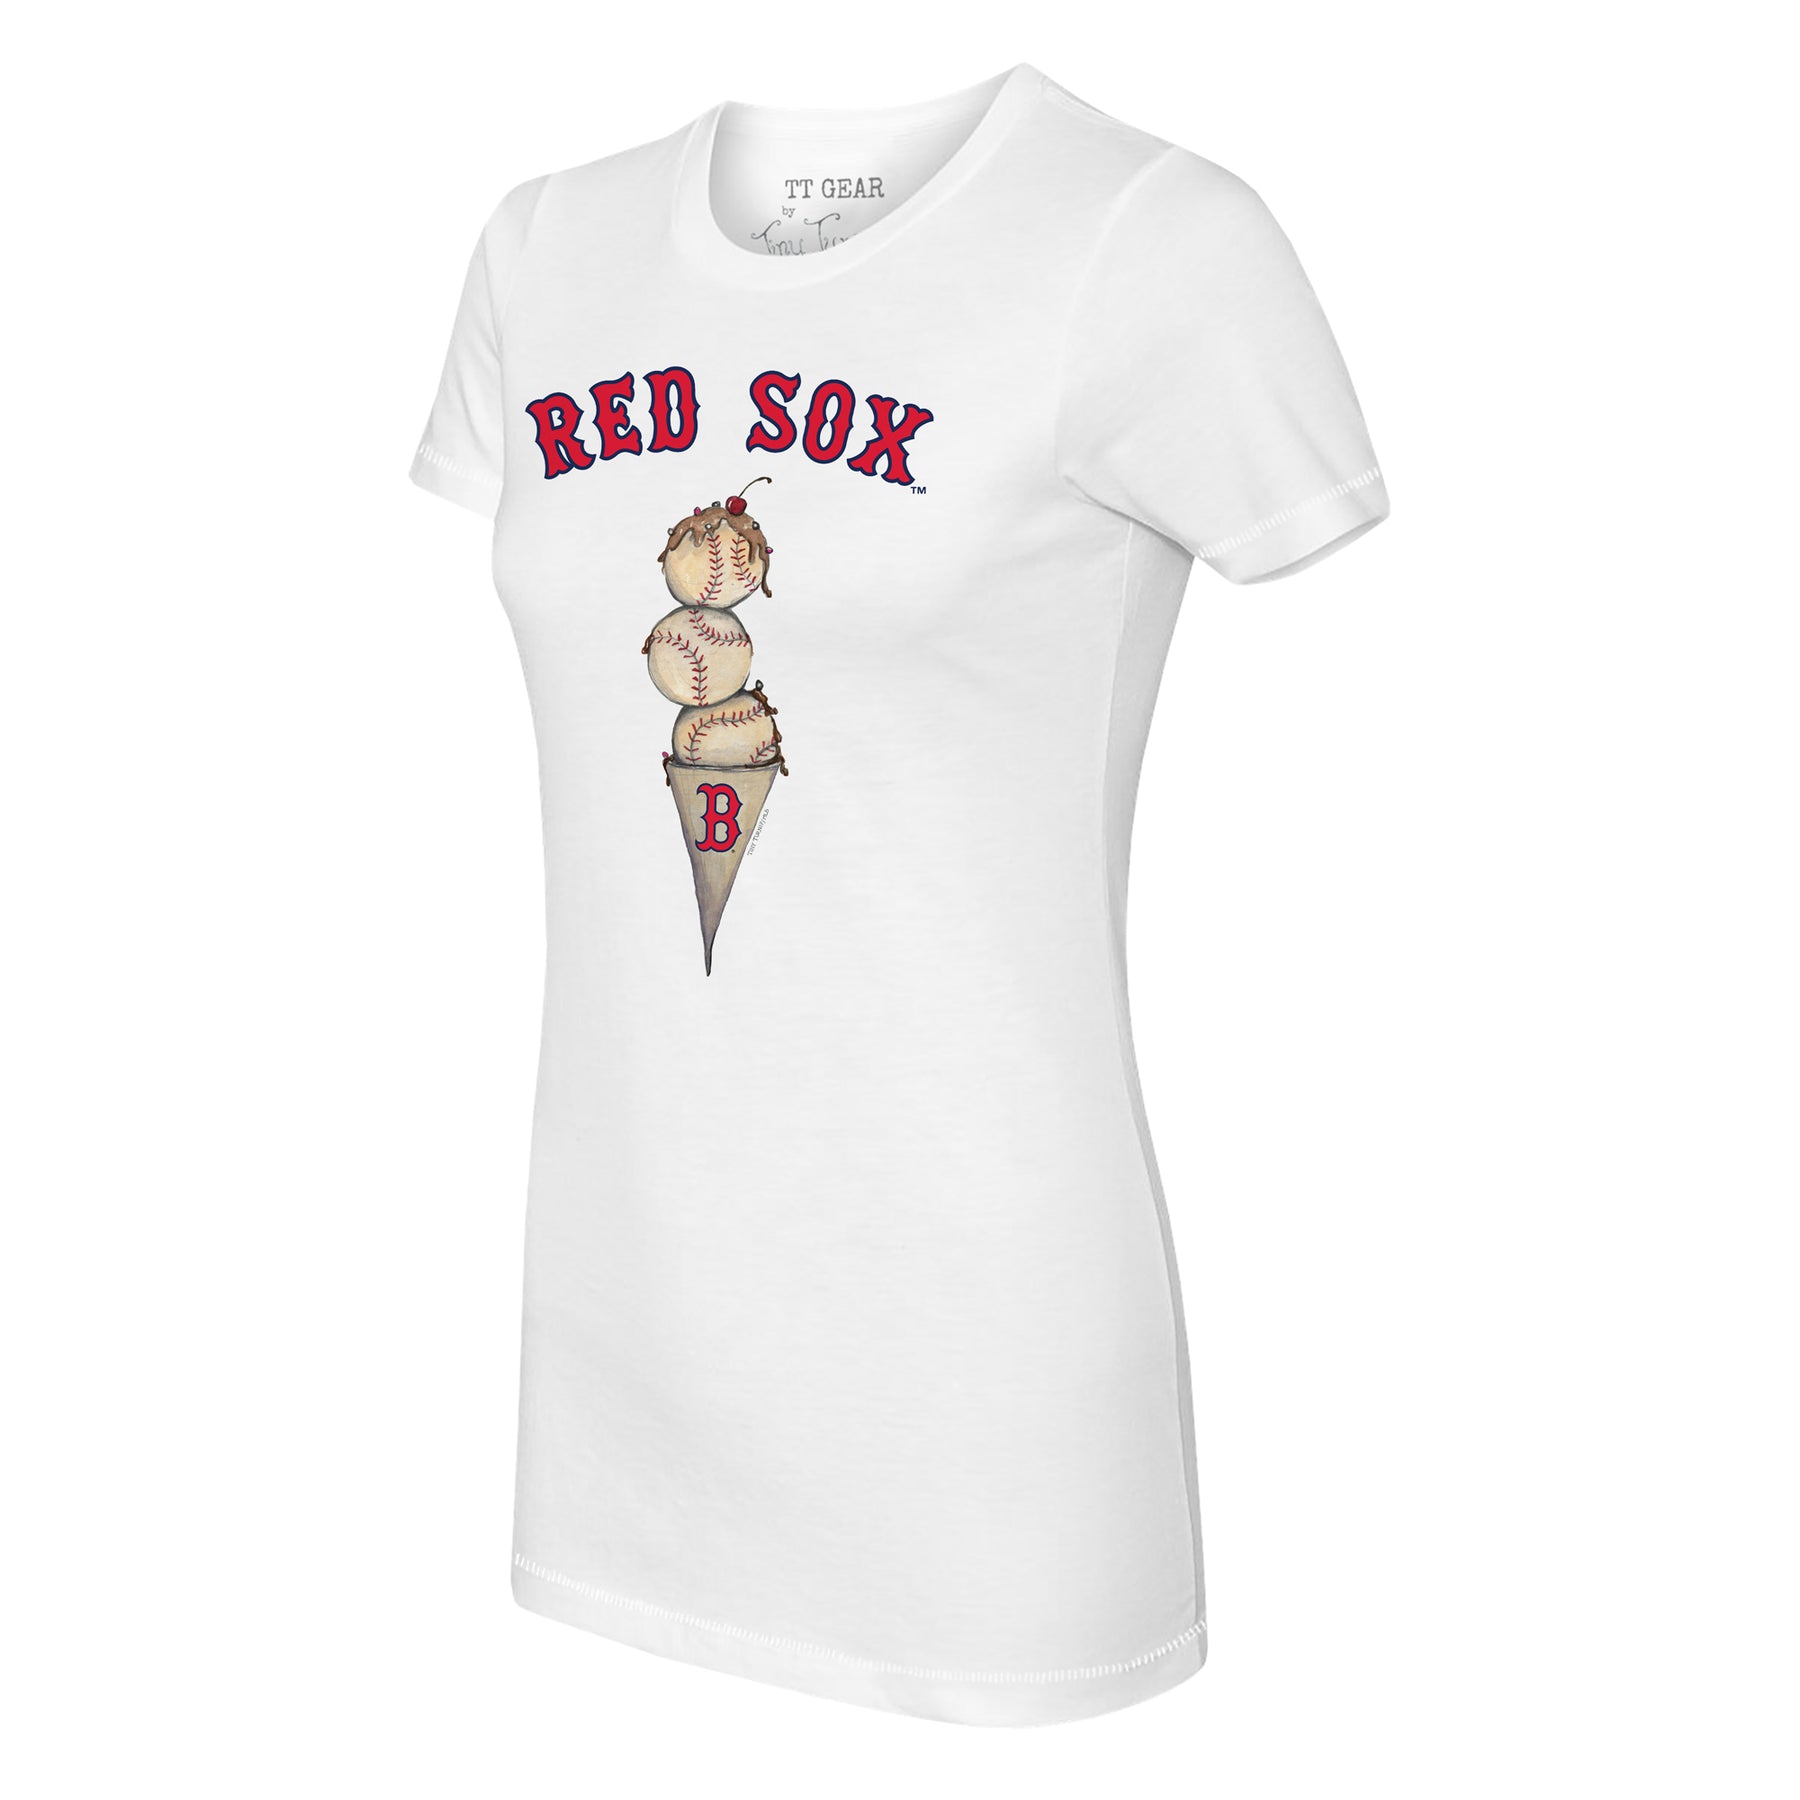 Boston Red Sox Triple Scoop Tee Shirt Youth Small (6-8) / Red